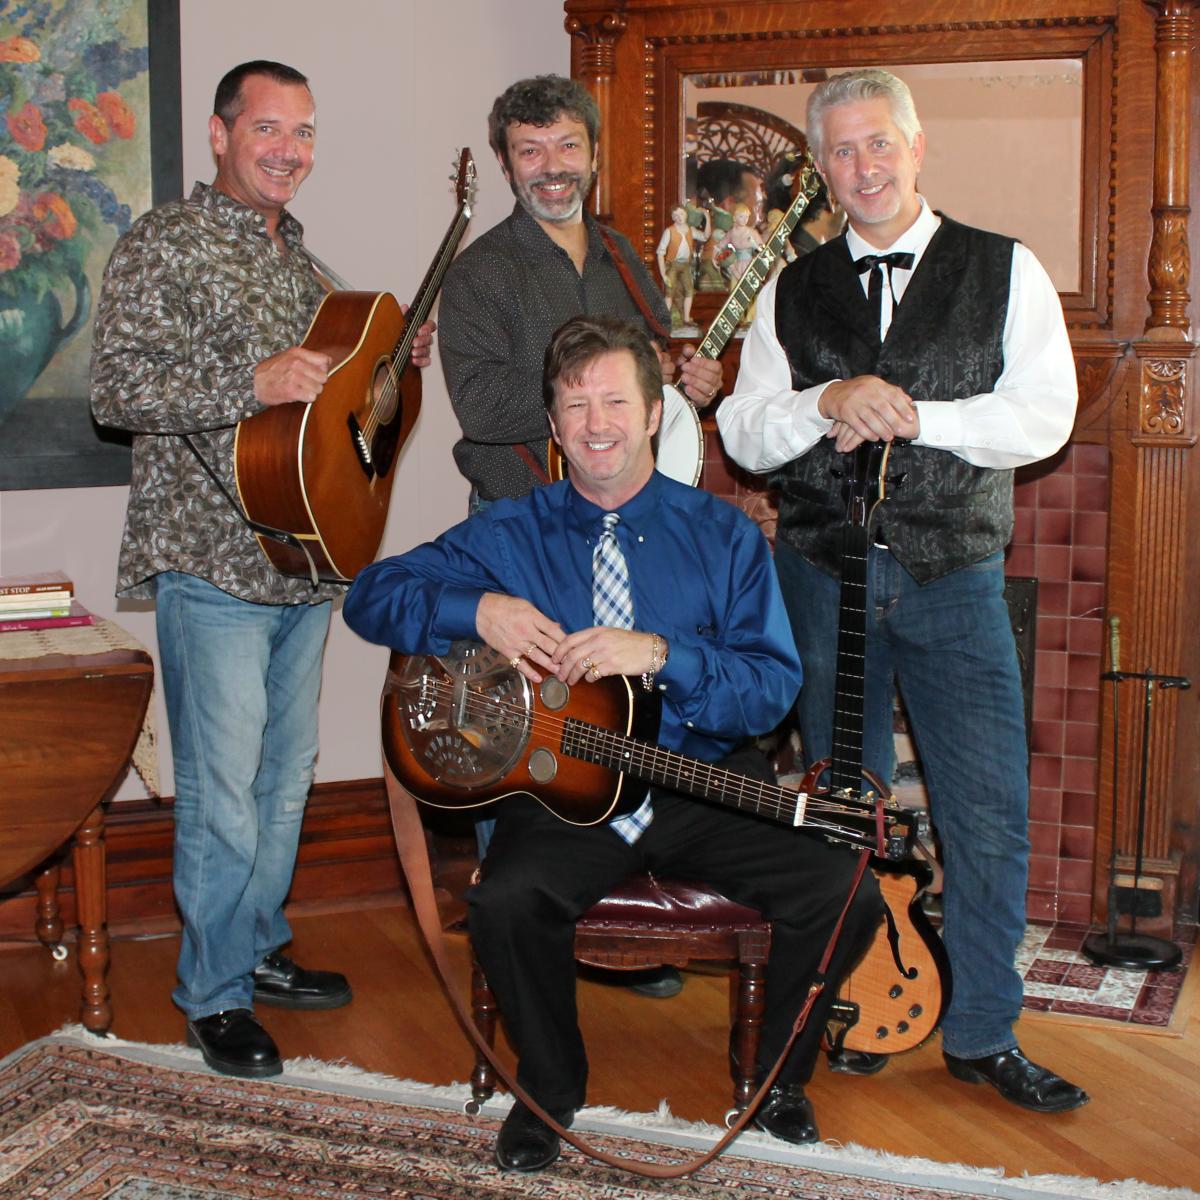 Bluegrass Music's 2015 Entertaining Band of the Year featuring Tim Graves, Daryl Mosley, Bennie Boling, and Keith Tew